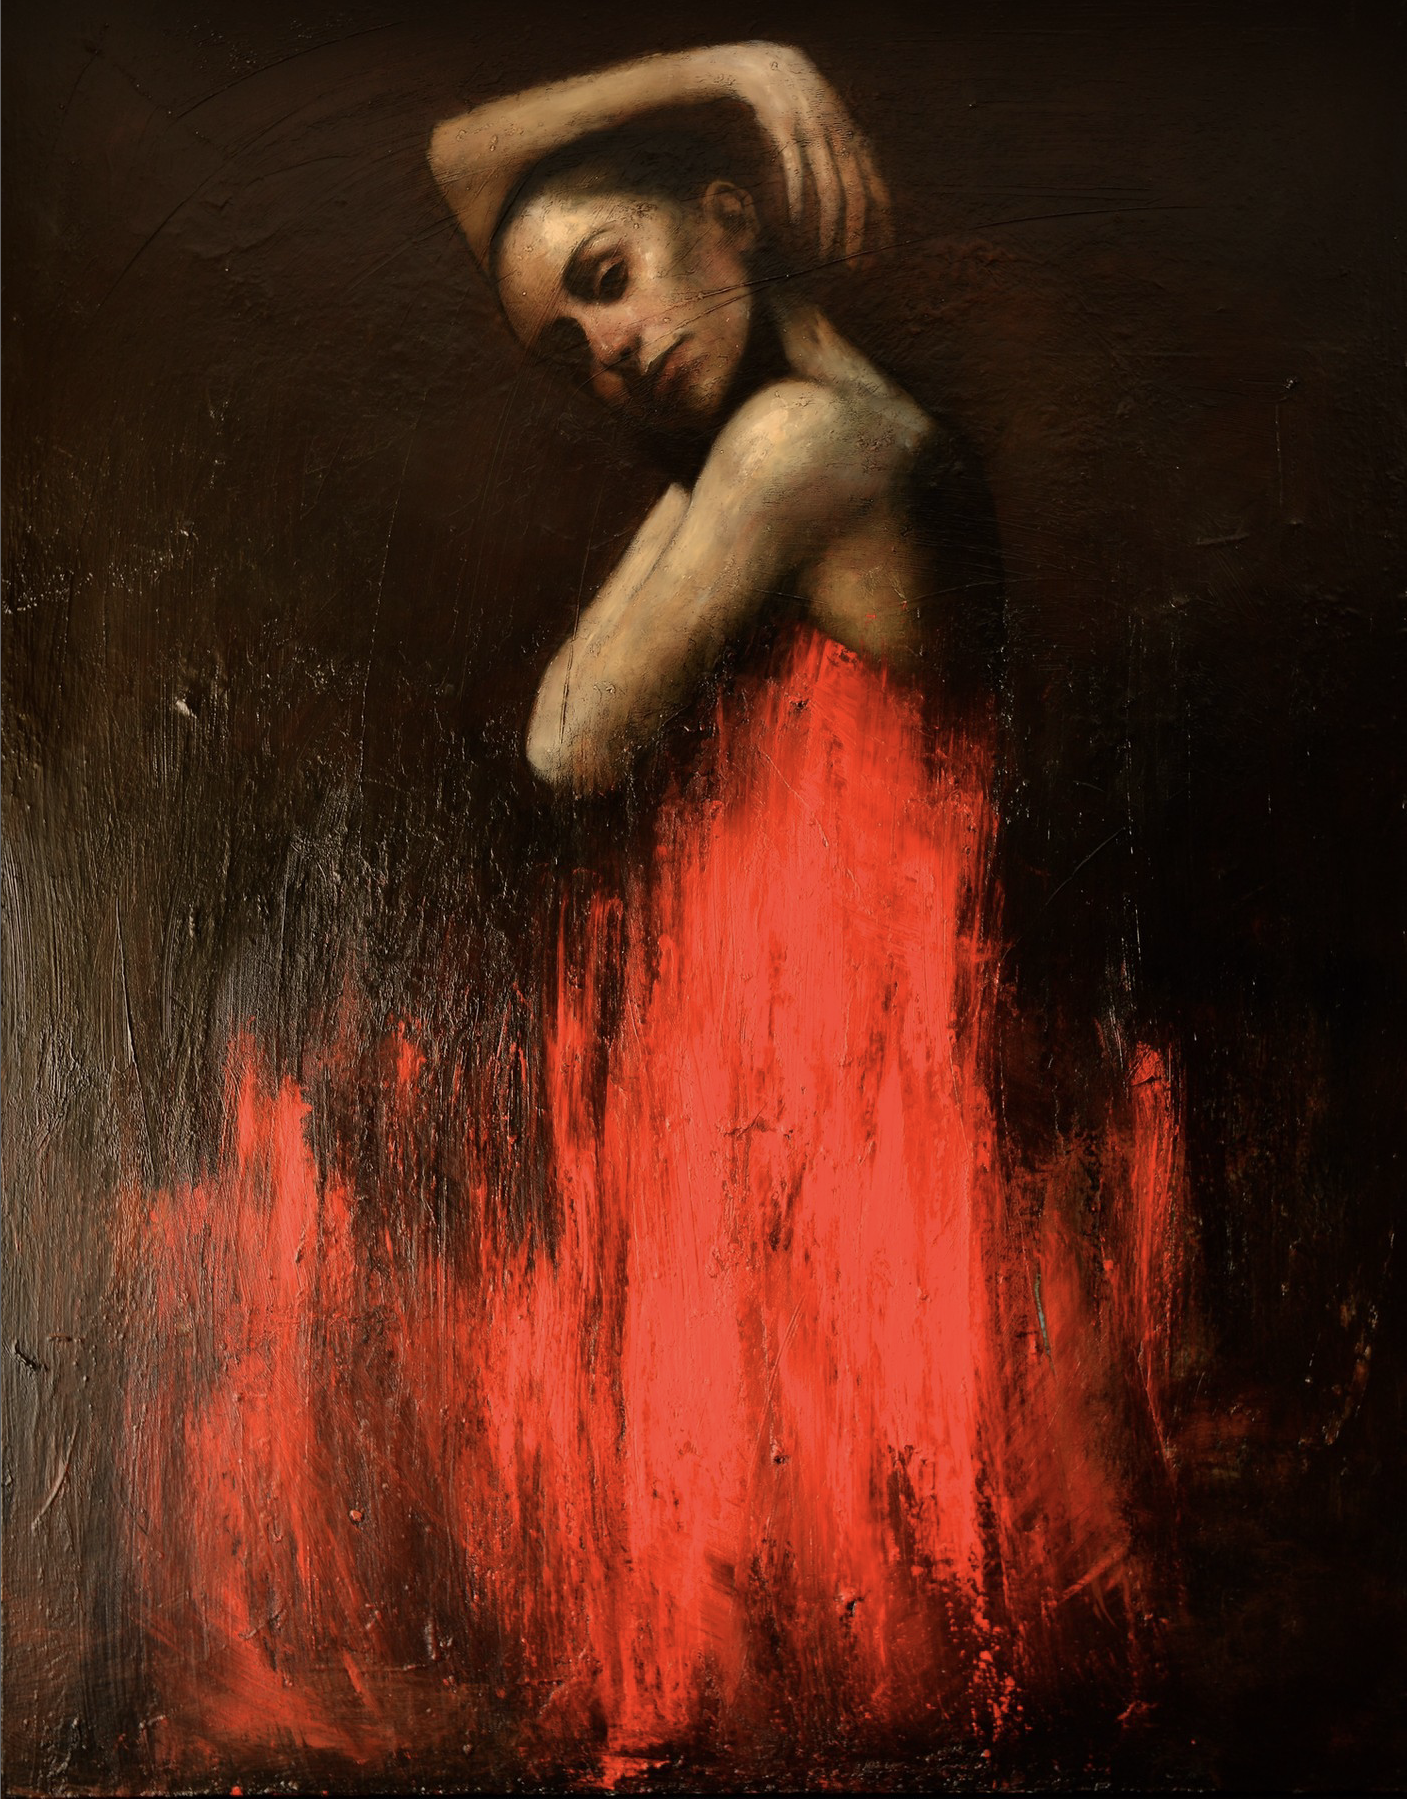 Manchester-based artist Mark Demsteader is known for his take on figurative art, including his series of portraits with actress Emma Watson.